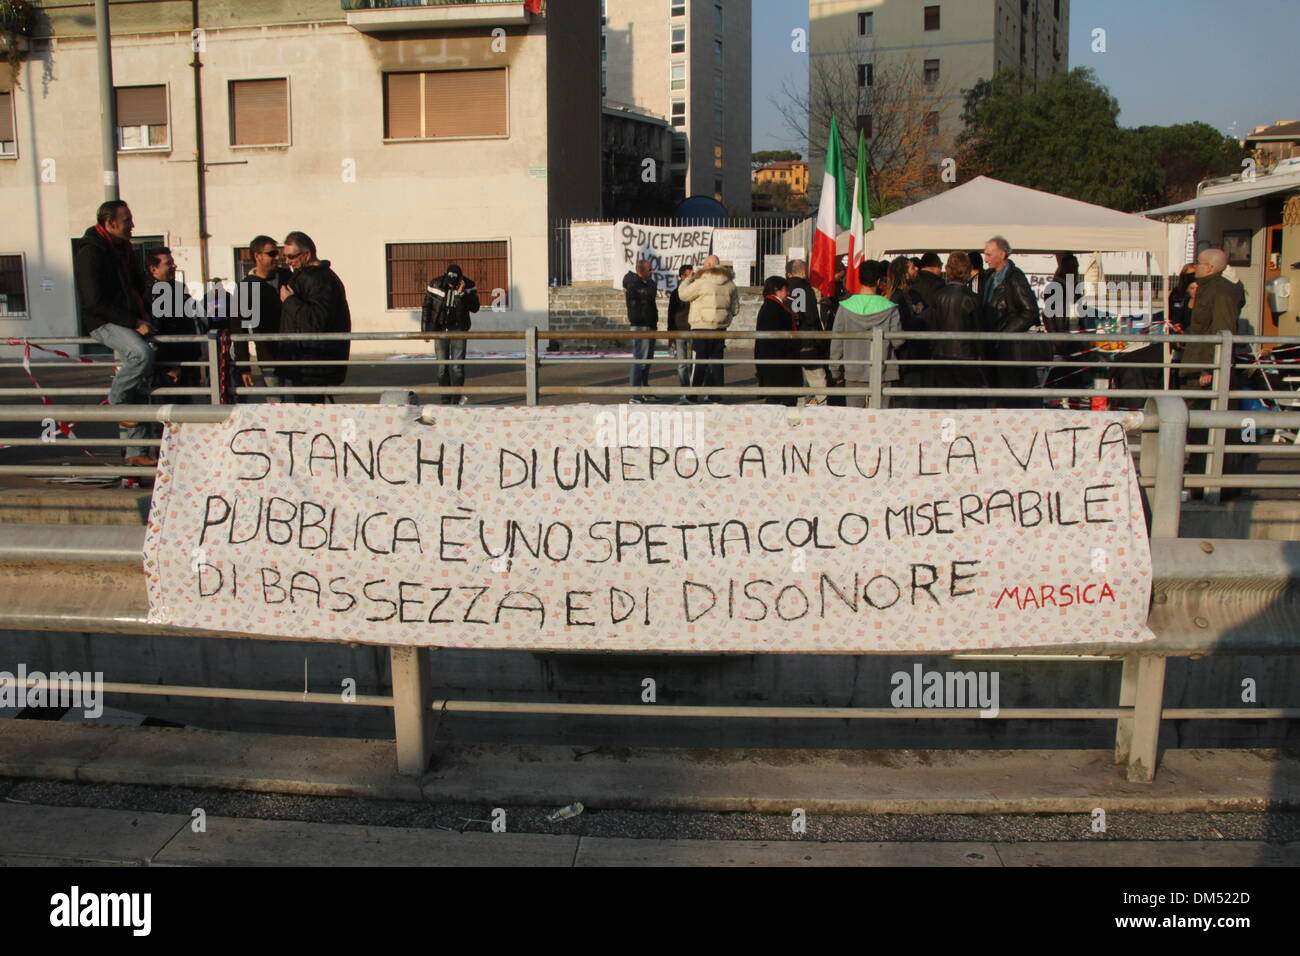 Rome, Italy. 11th December 2013. The 'pitchfork movement' protesters against ineffective government, austerity and recession congregate in Piazzale dei Partigiani, Rome, Ital Credit:  Gari Wyn Williams/Alamy Live News Stock Photo